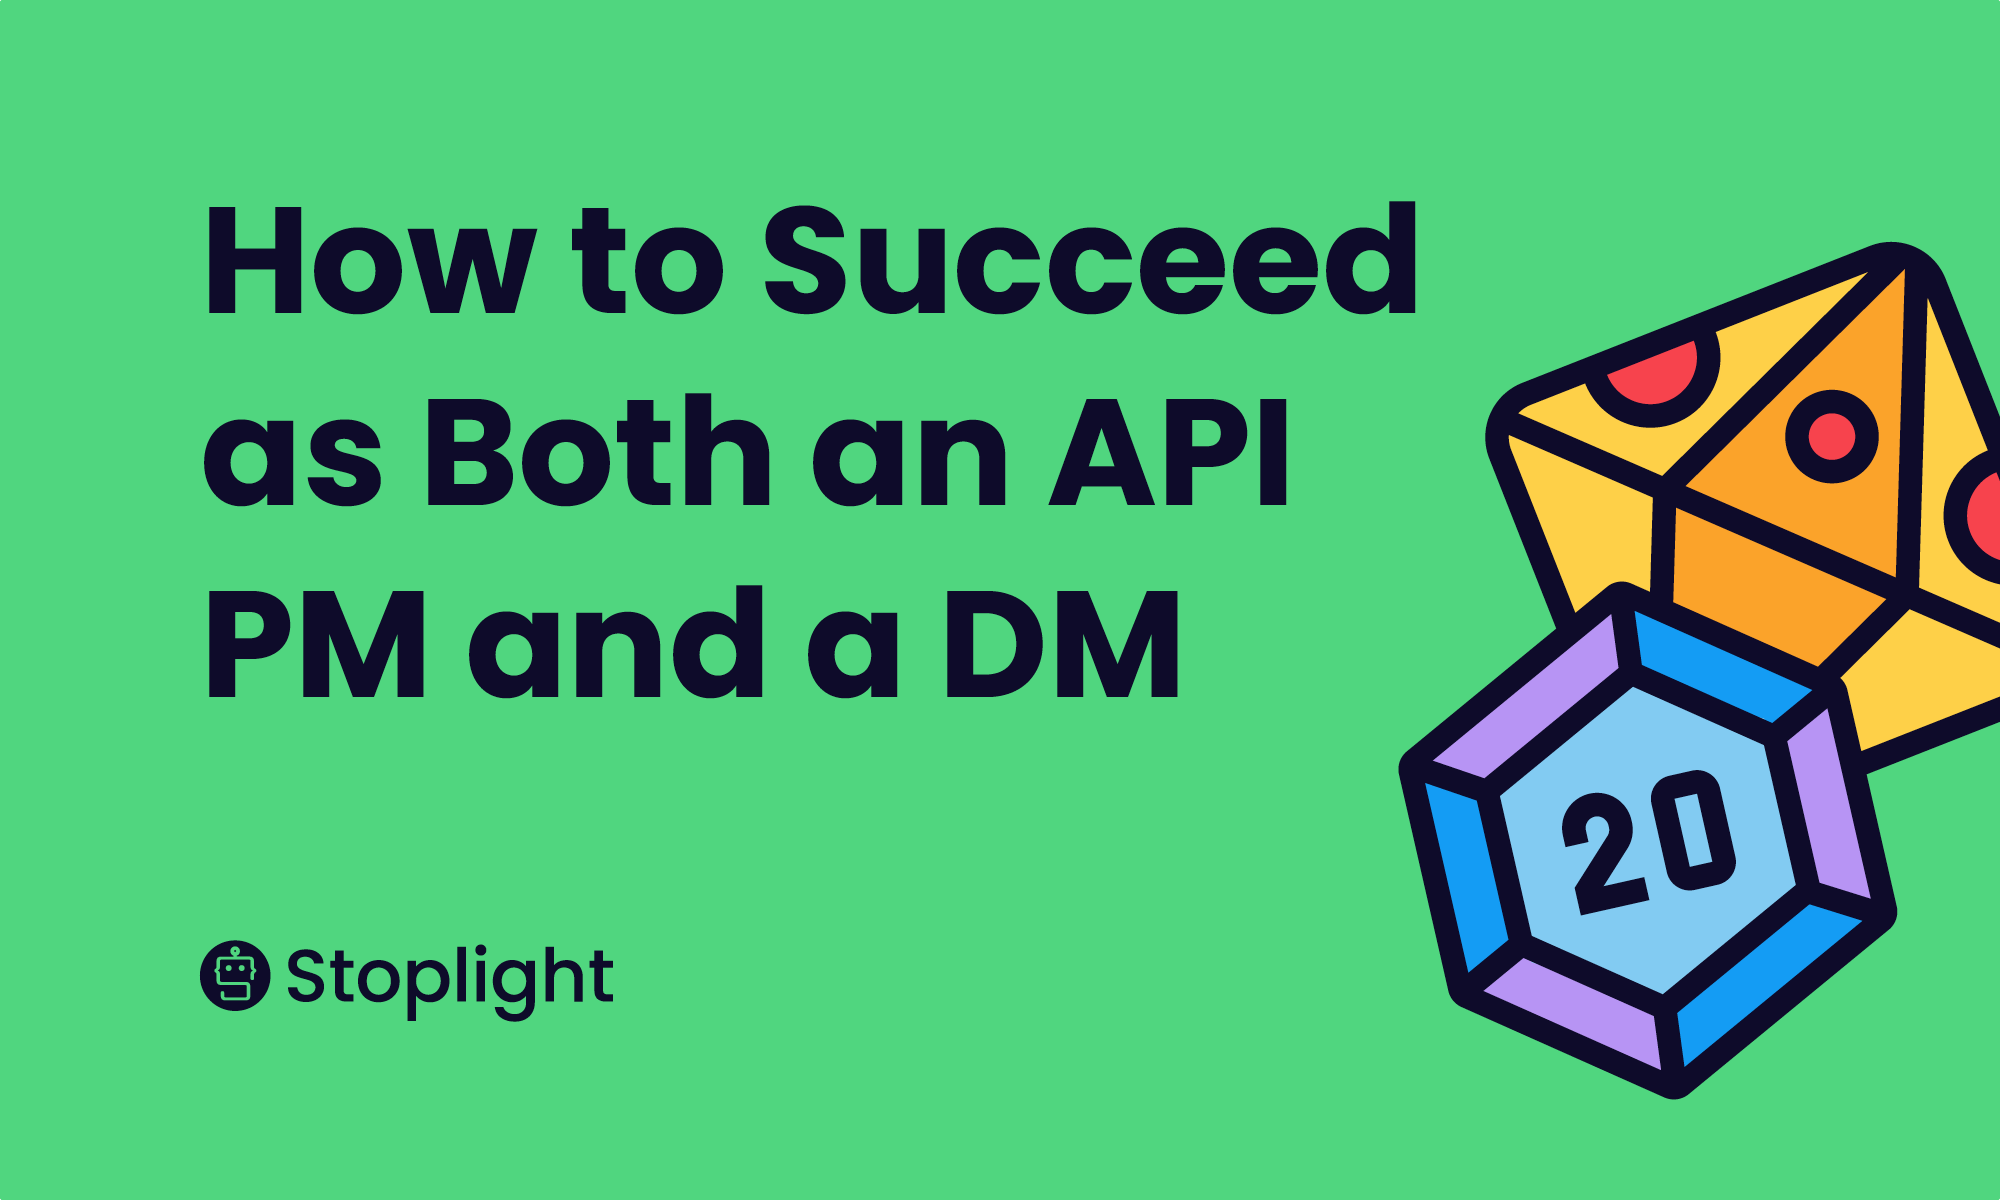 How to Succeed as Both an API PM and as a DM